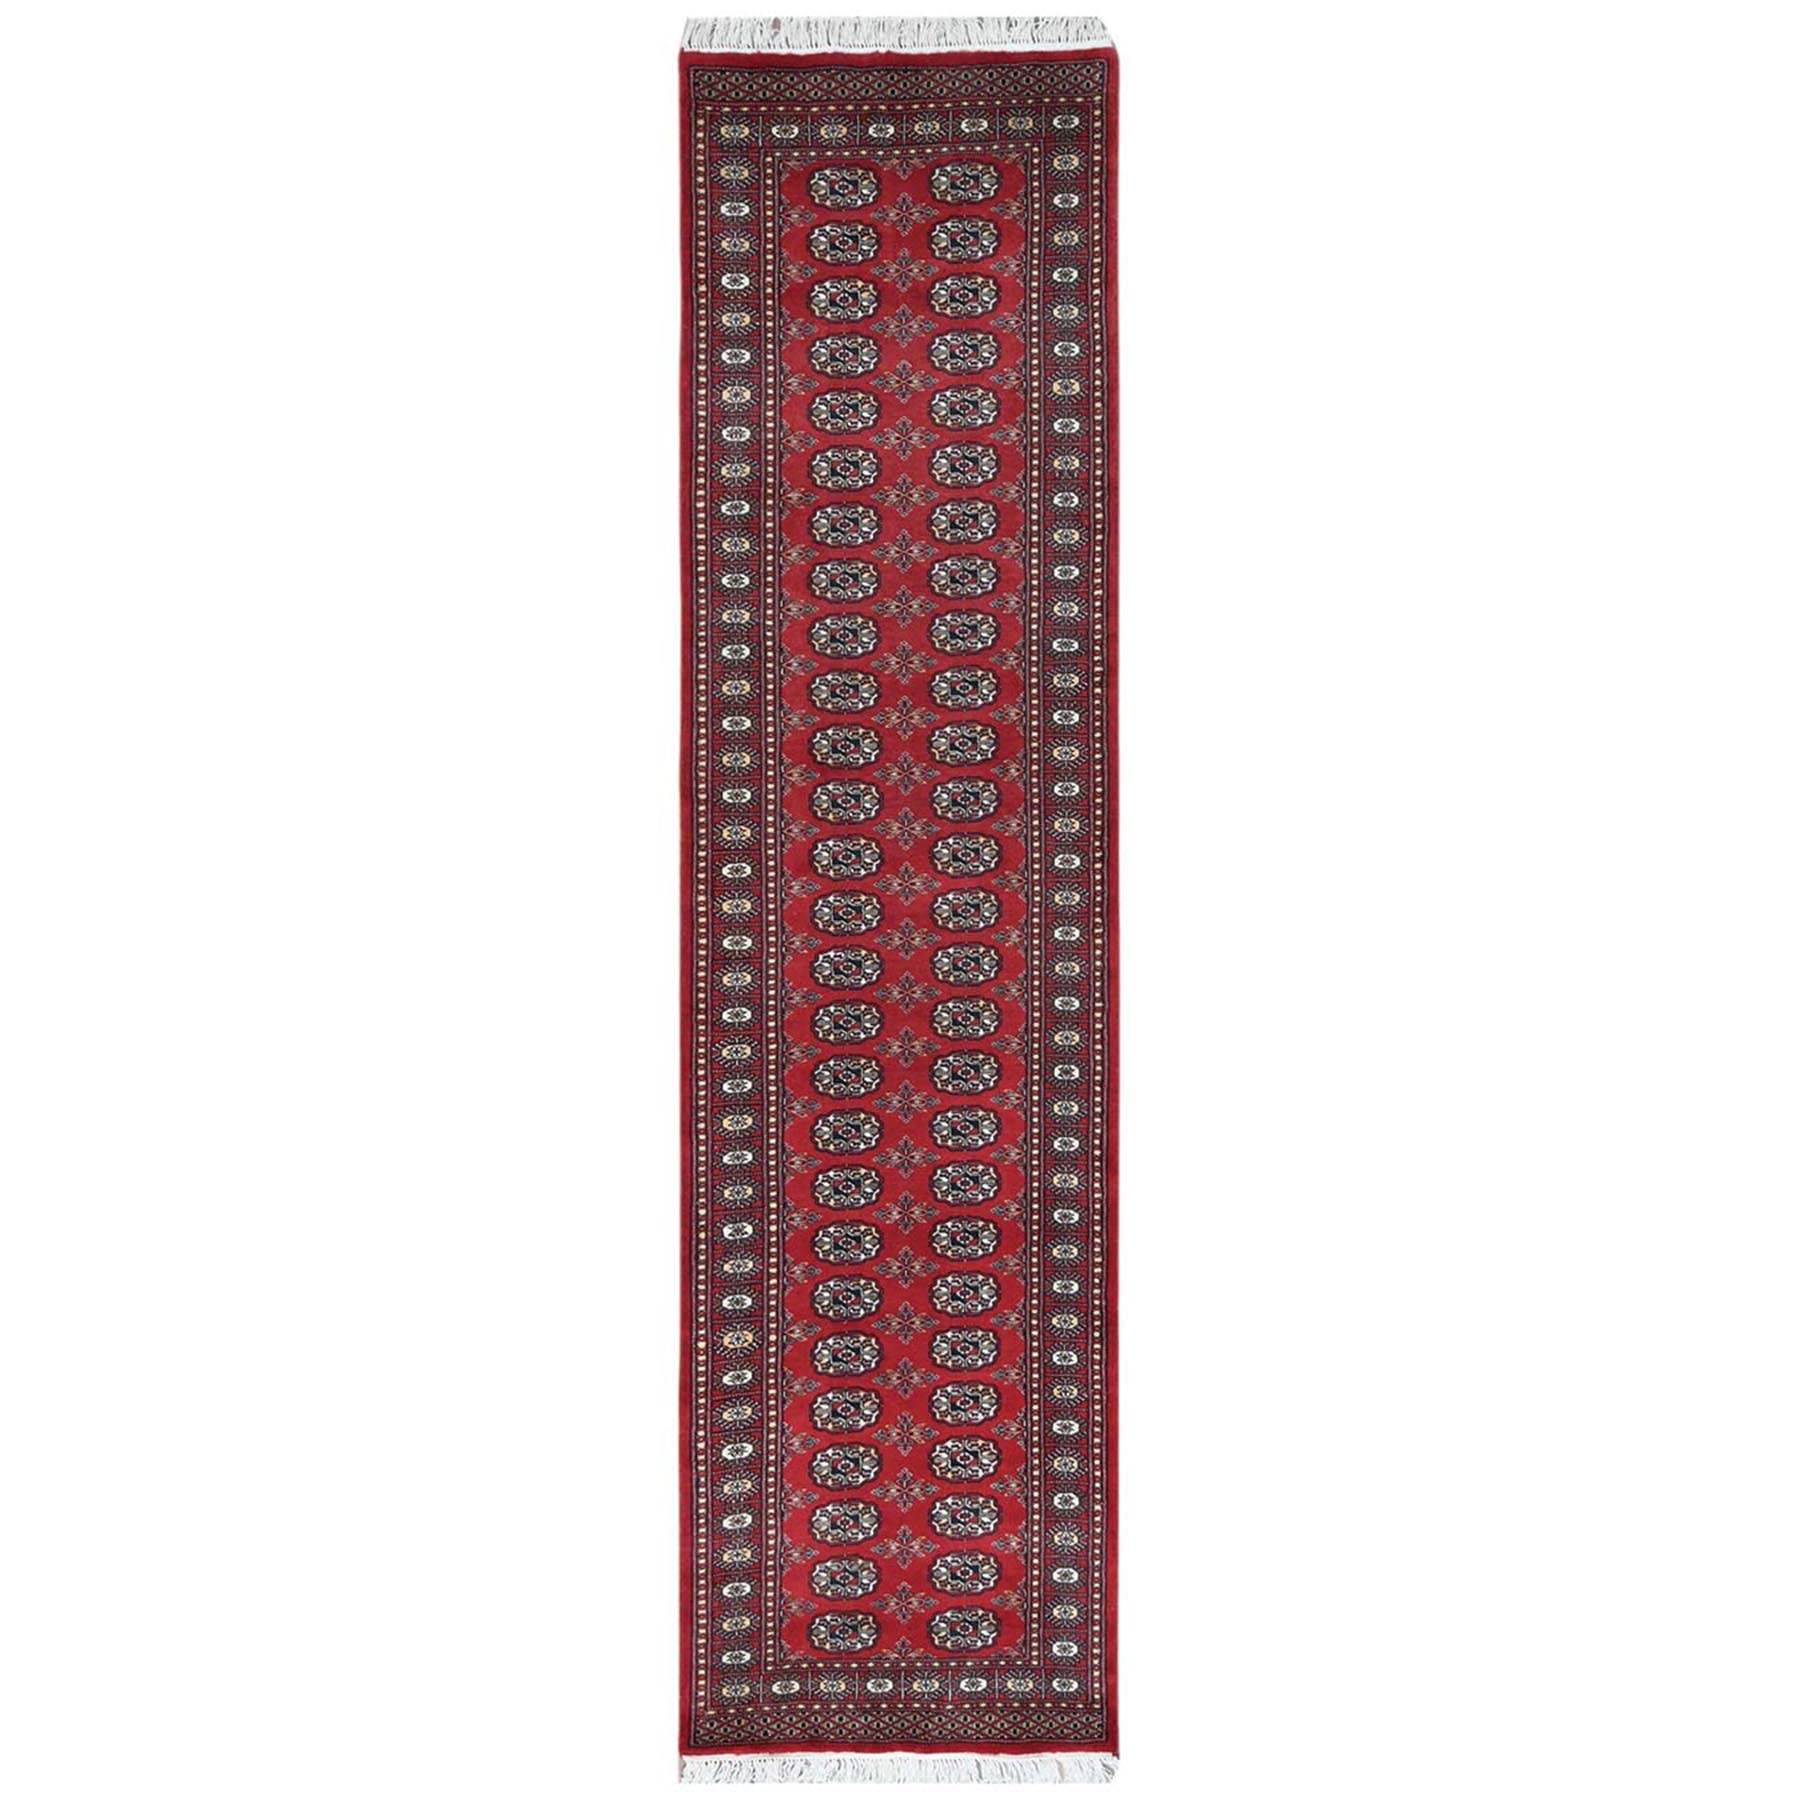 Nomadic And Village Collection Hand Knotted Red Rug No: 1122742